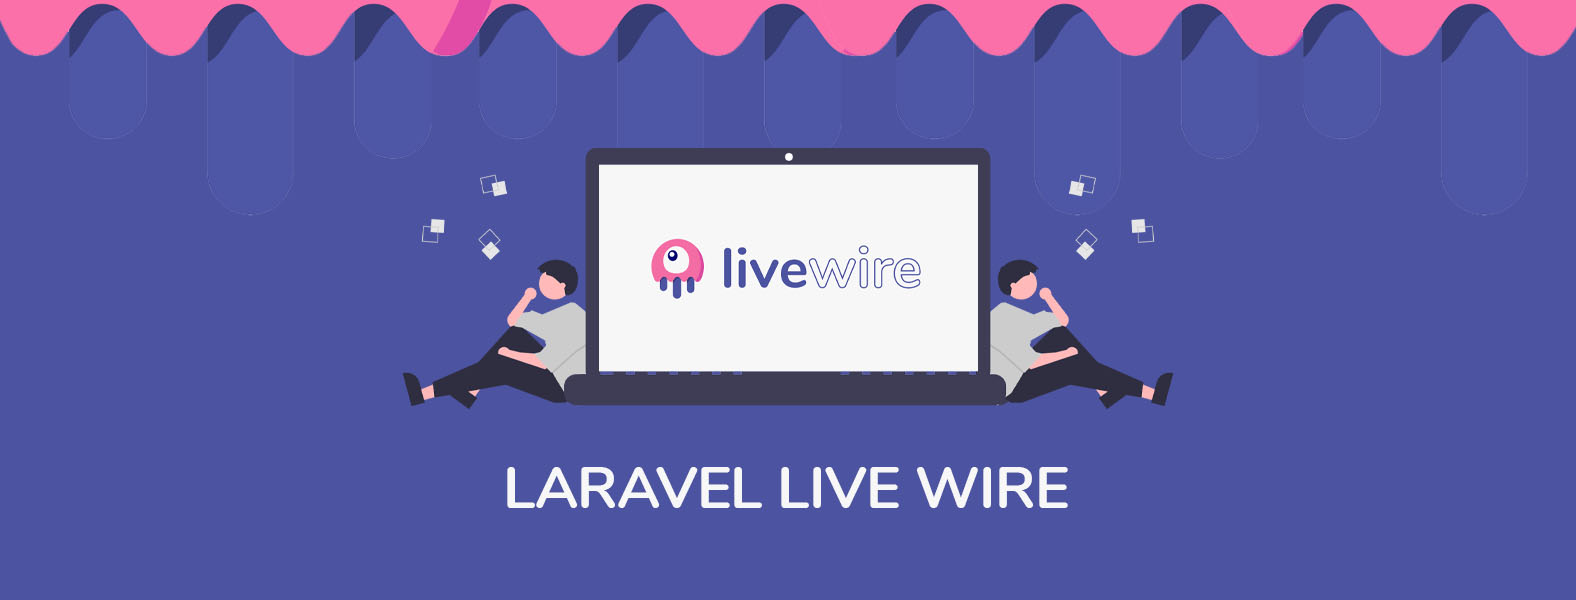 Laravel Livewire - Building Dynamic Interfaces Easily